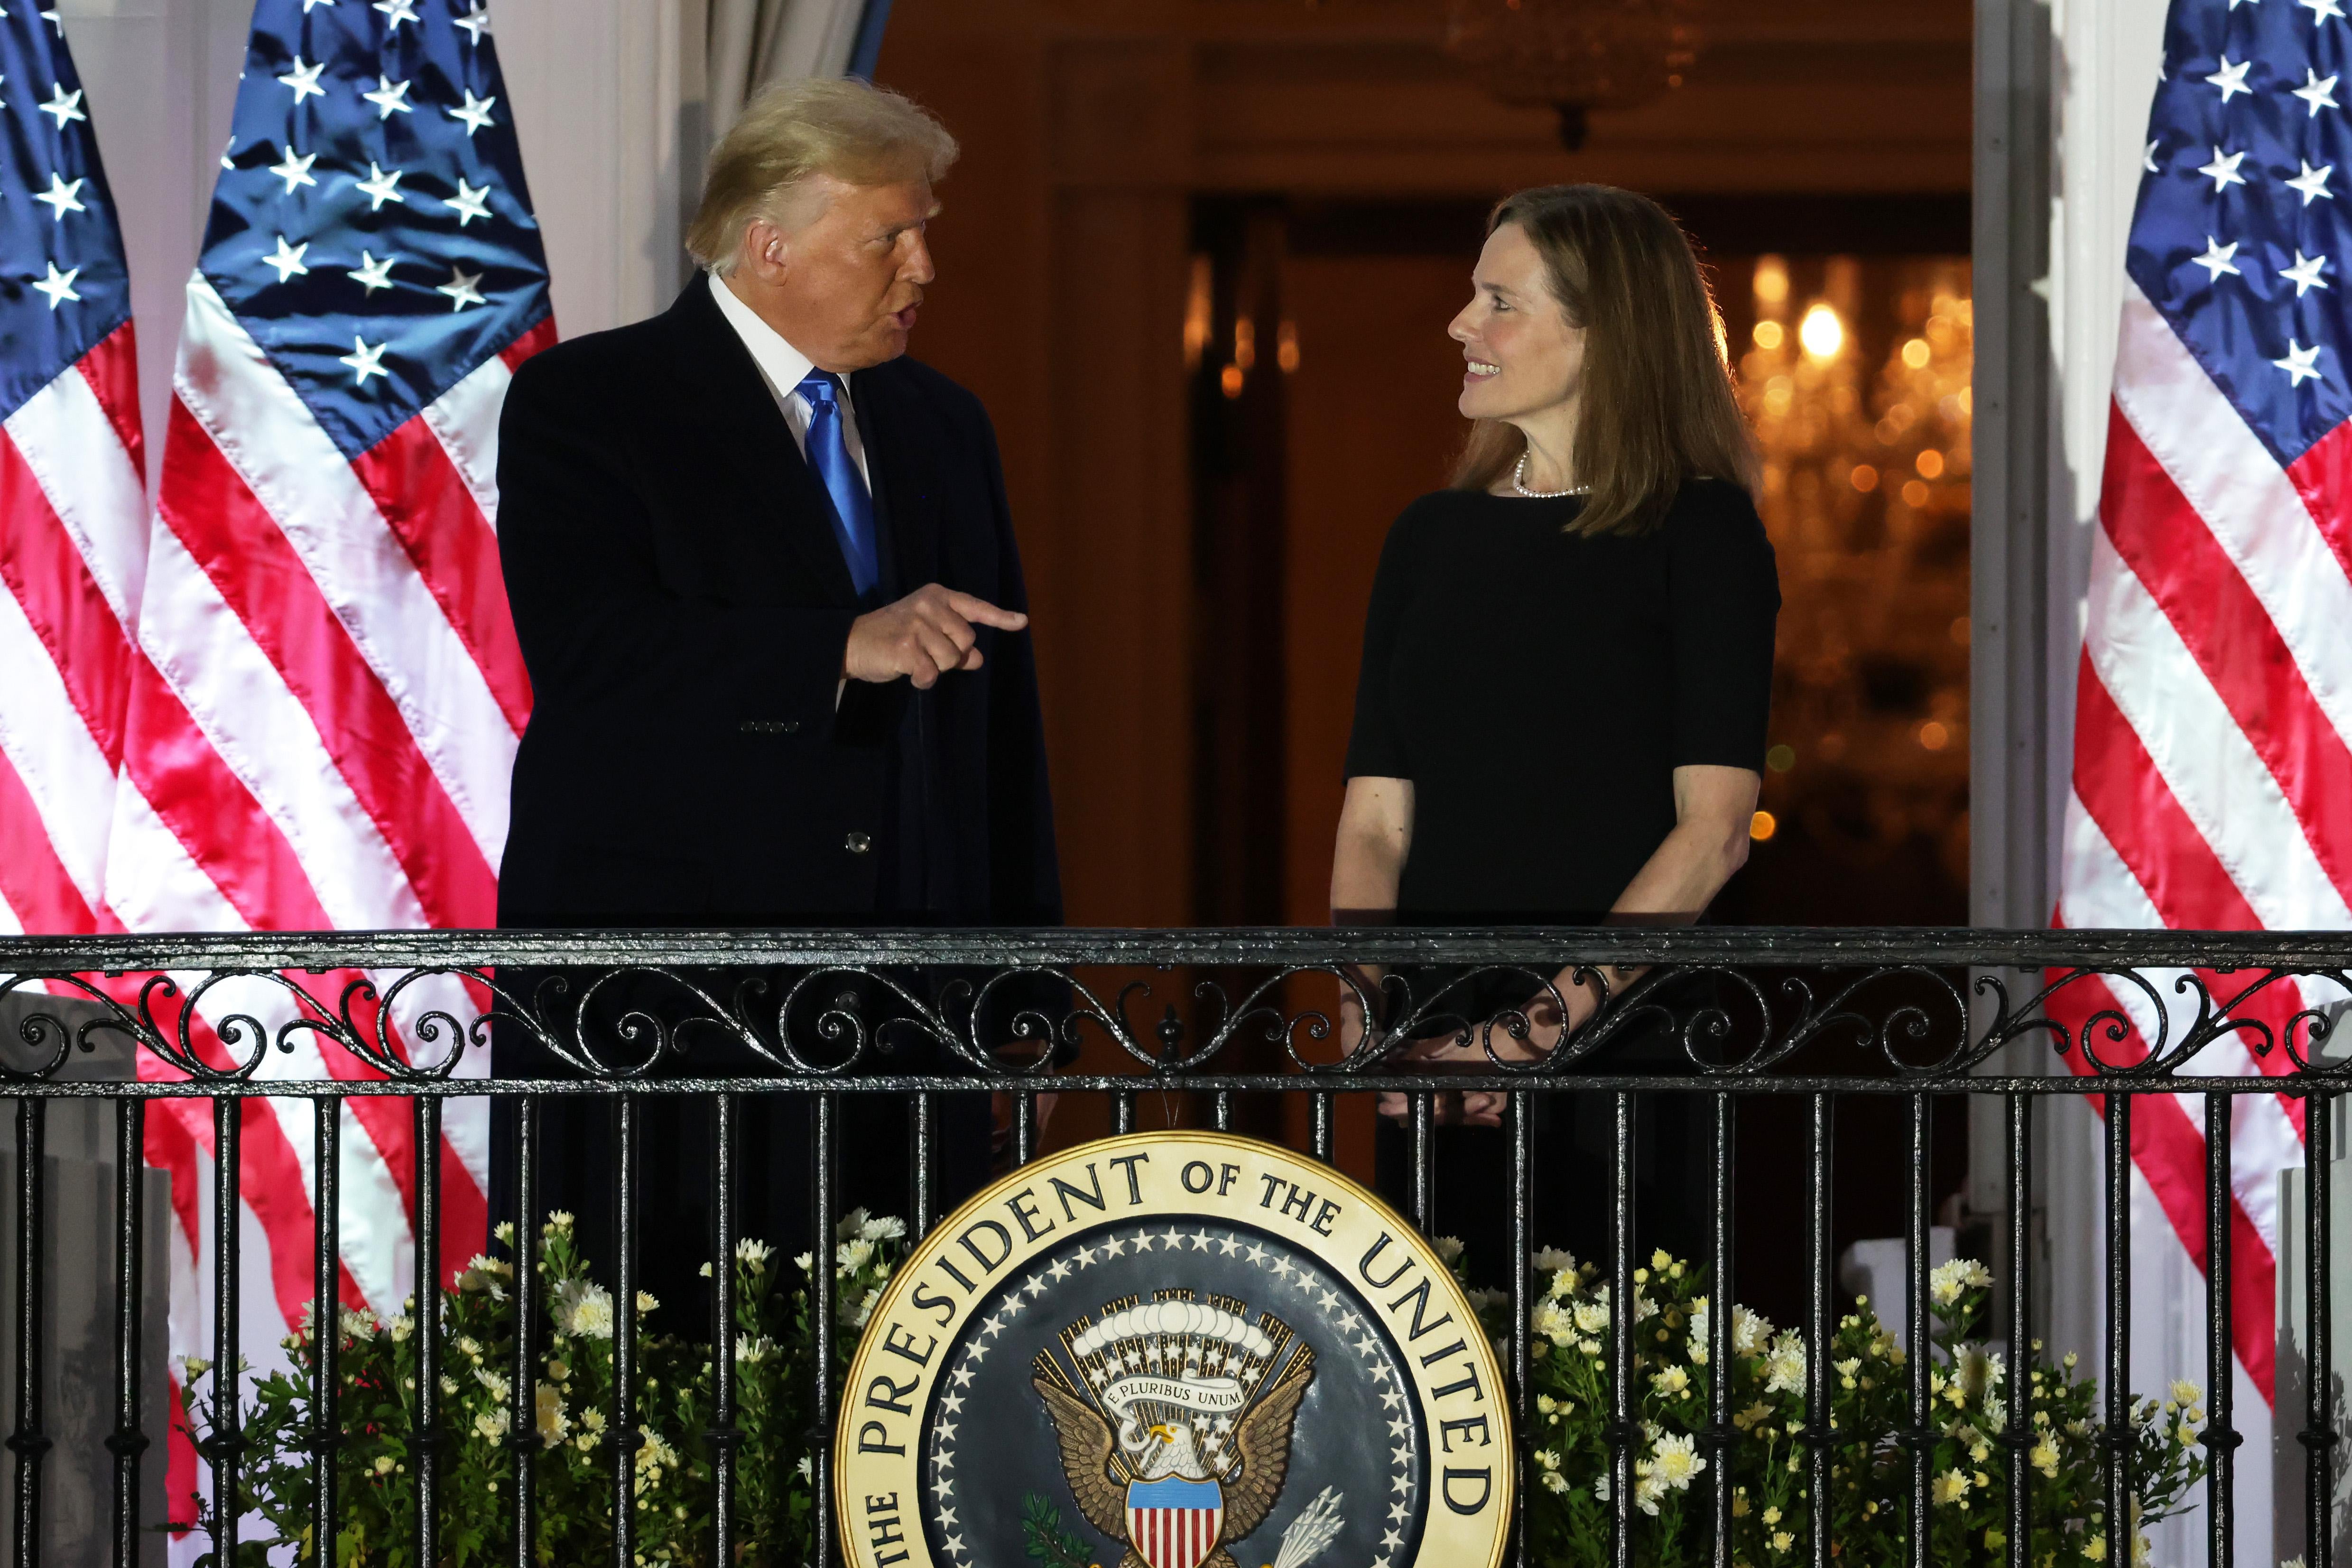 Donald Trump points as he speaks with Amy Coney Barrett on a White House balcony.